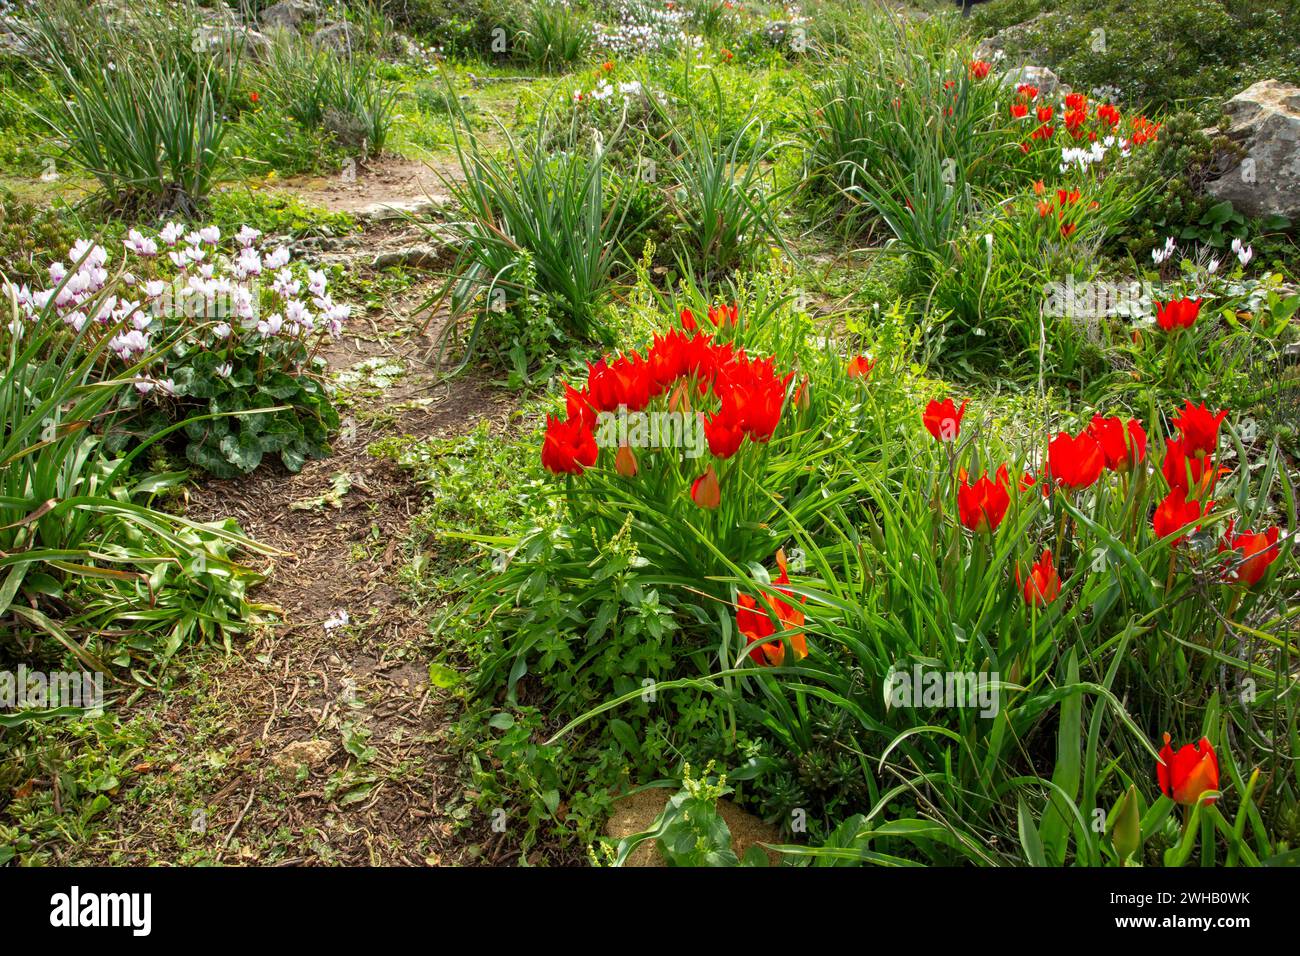 Tulipa agenensis is a bulb-forming perennial. The flowers are brick red or deep red with black and yellow markings toward the center with a green stem Stock Photo